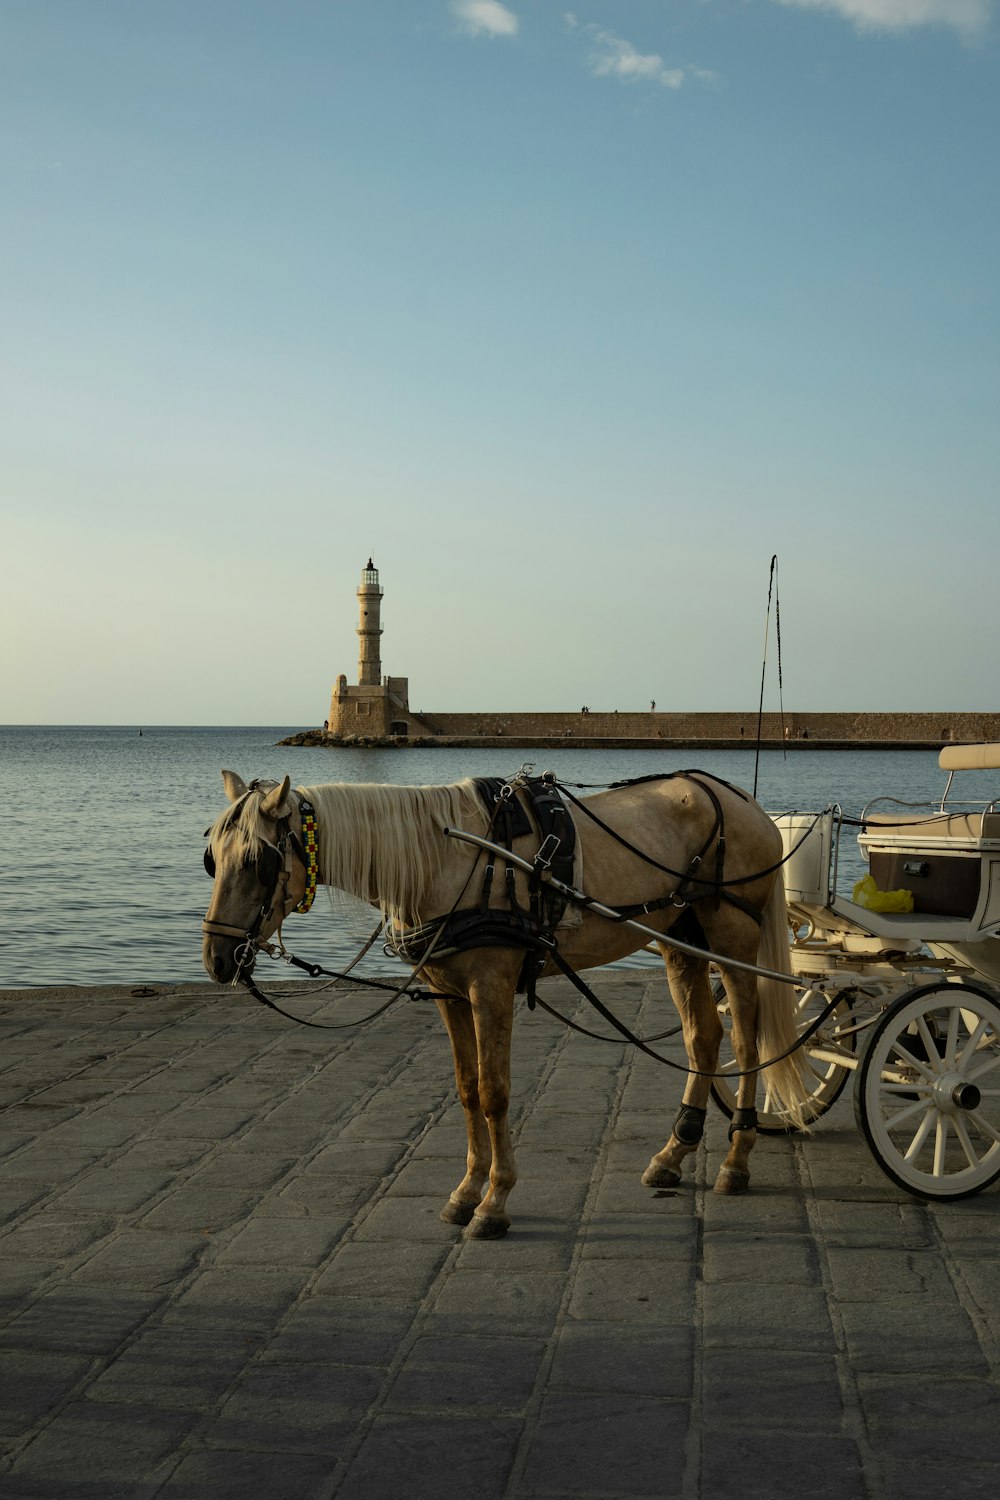 a horse pulling a carriage on the side of a body of water